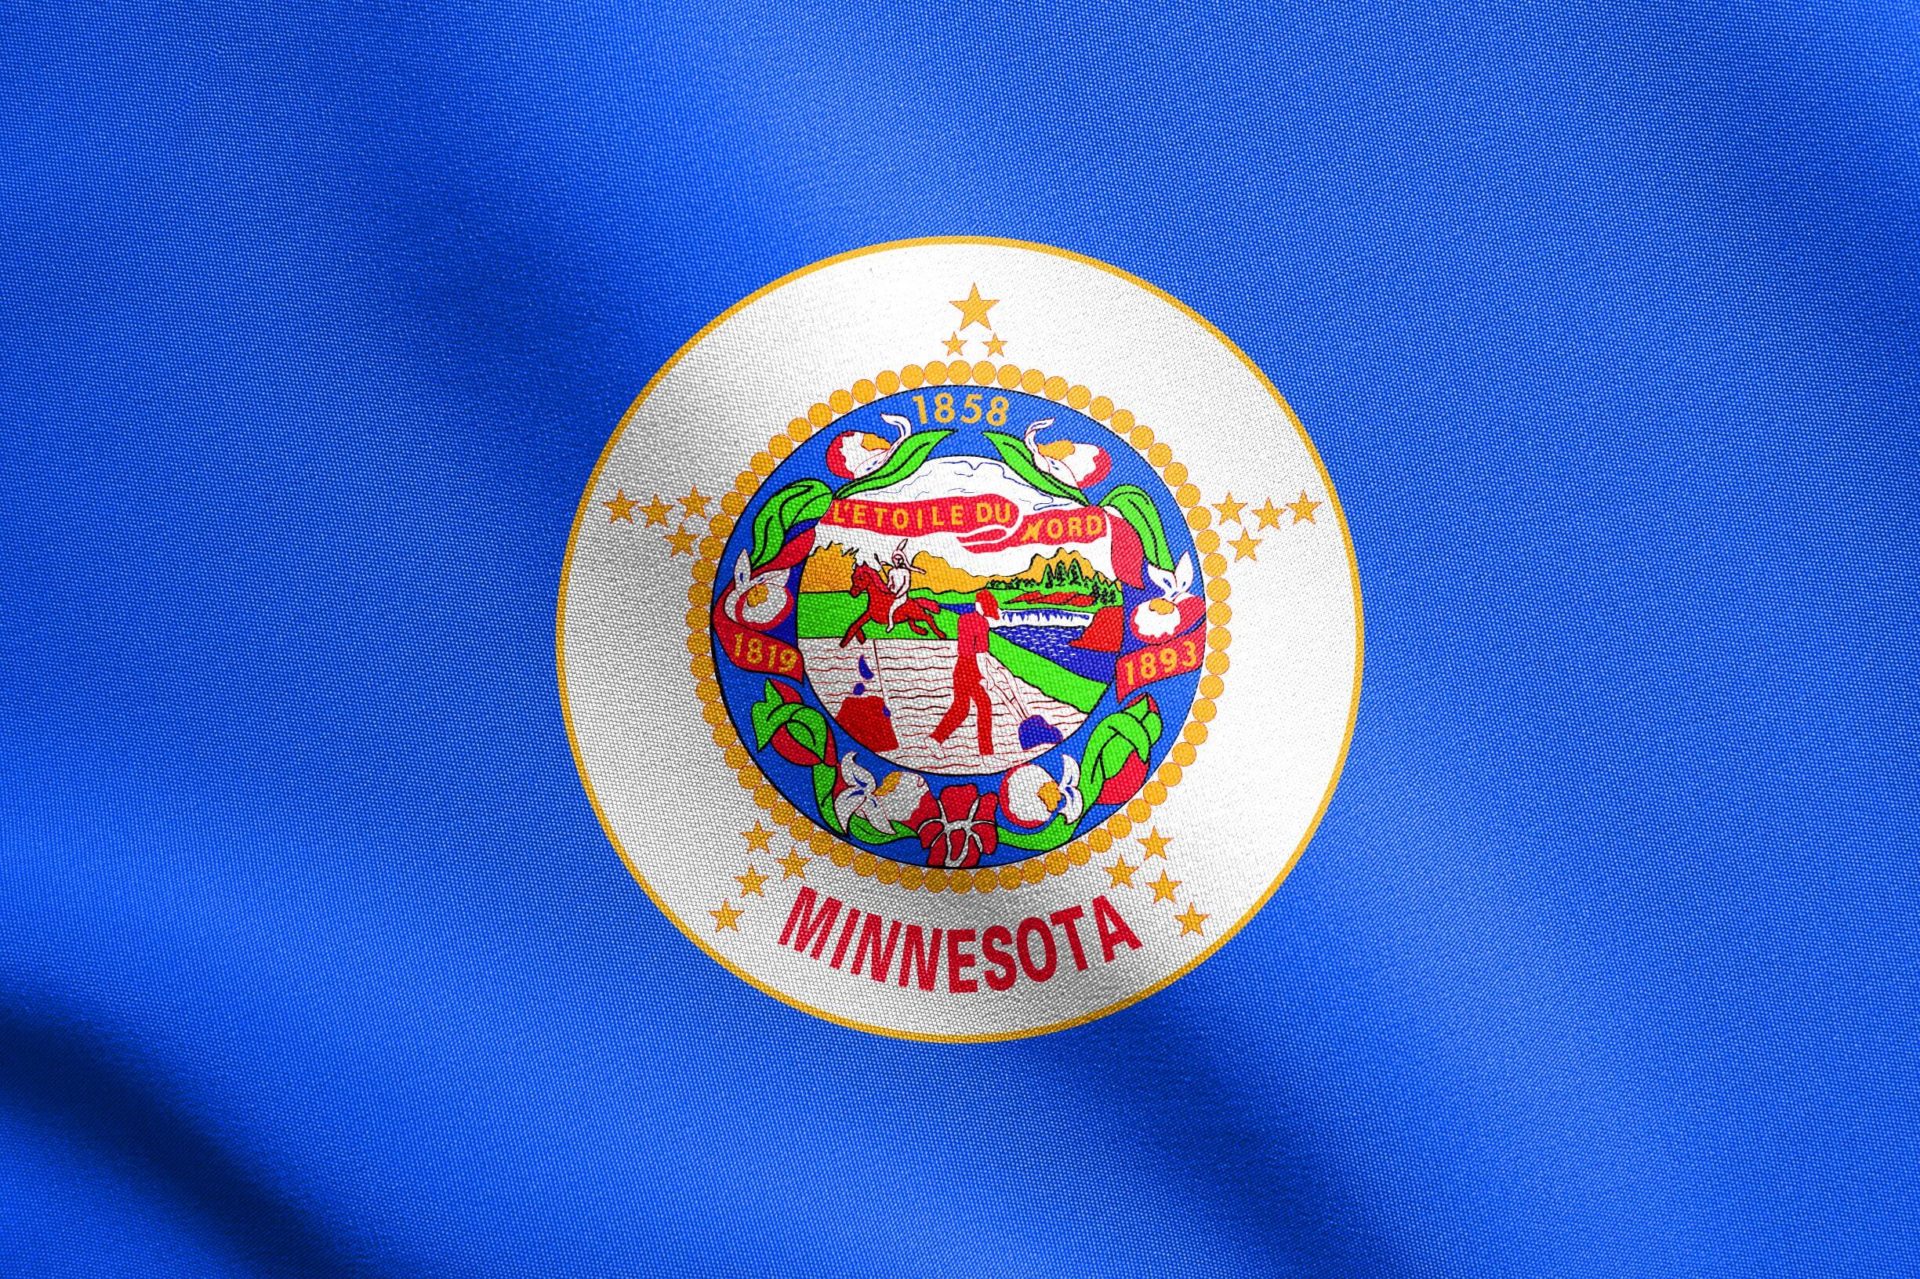 The Minnesota state flag which connects to how truckers should get Minnesota truck insurance.